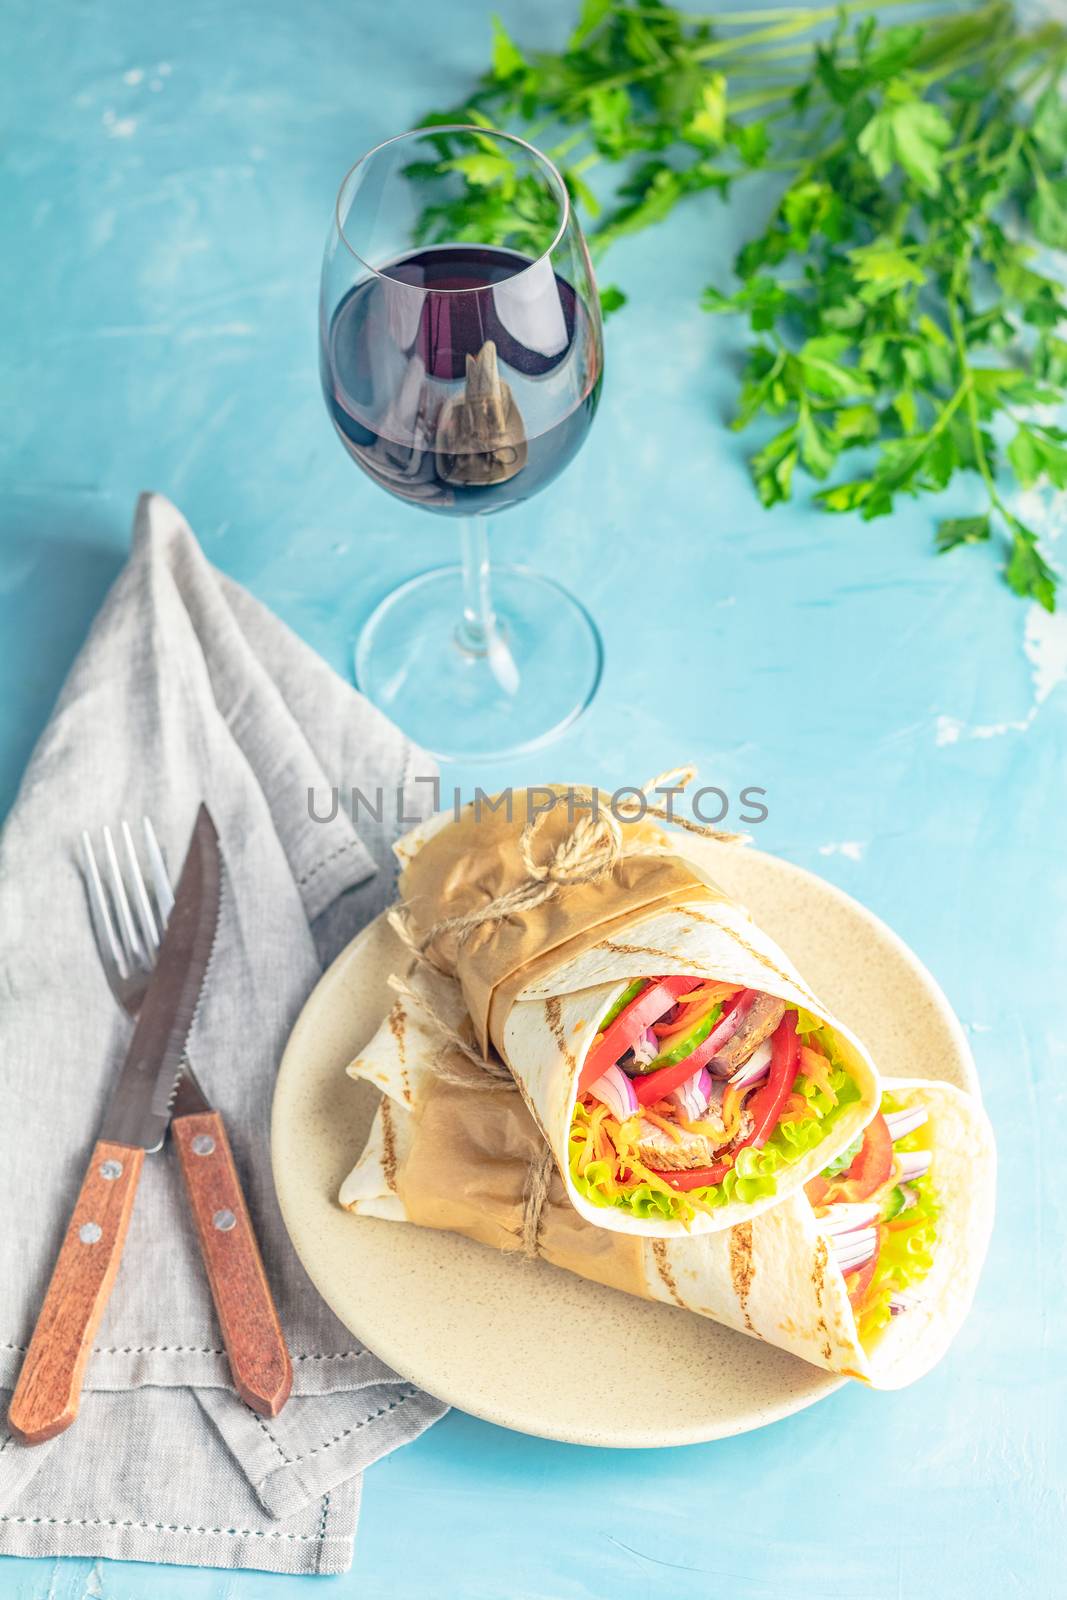 Traditional Middle Eastern snack served with wine. by ArtSvitlyna